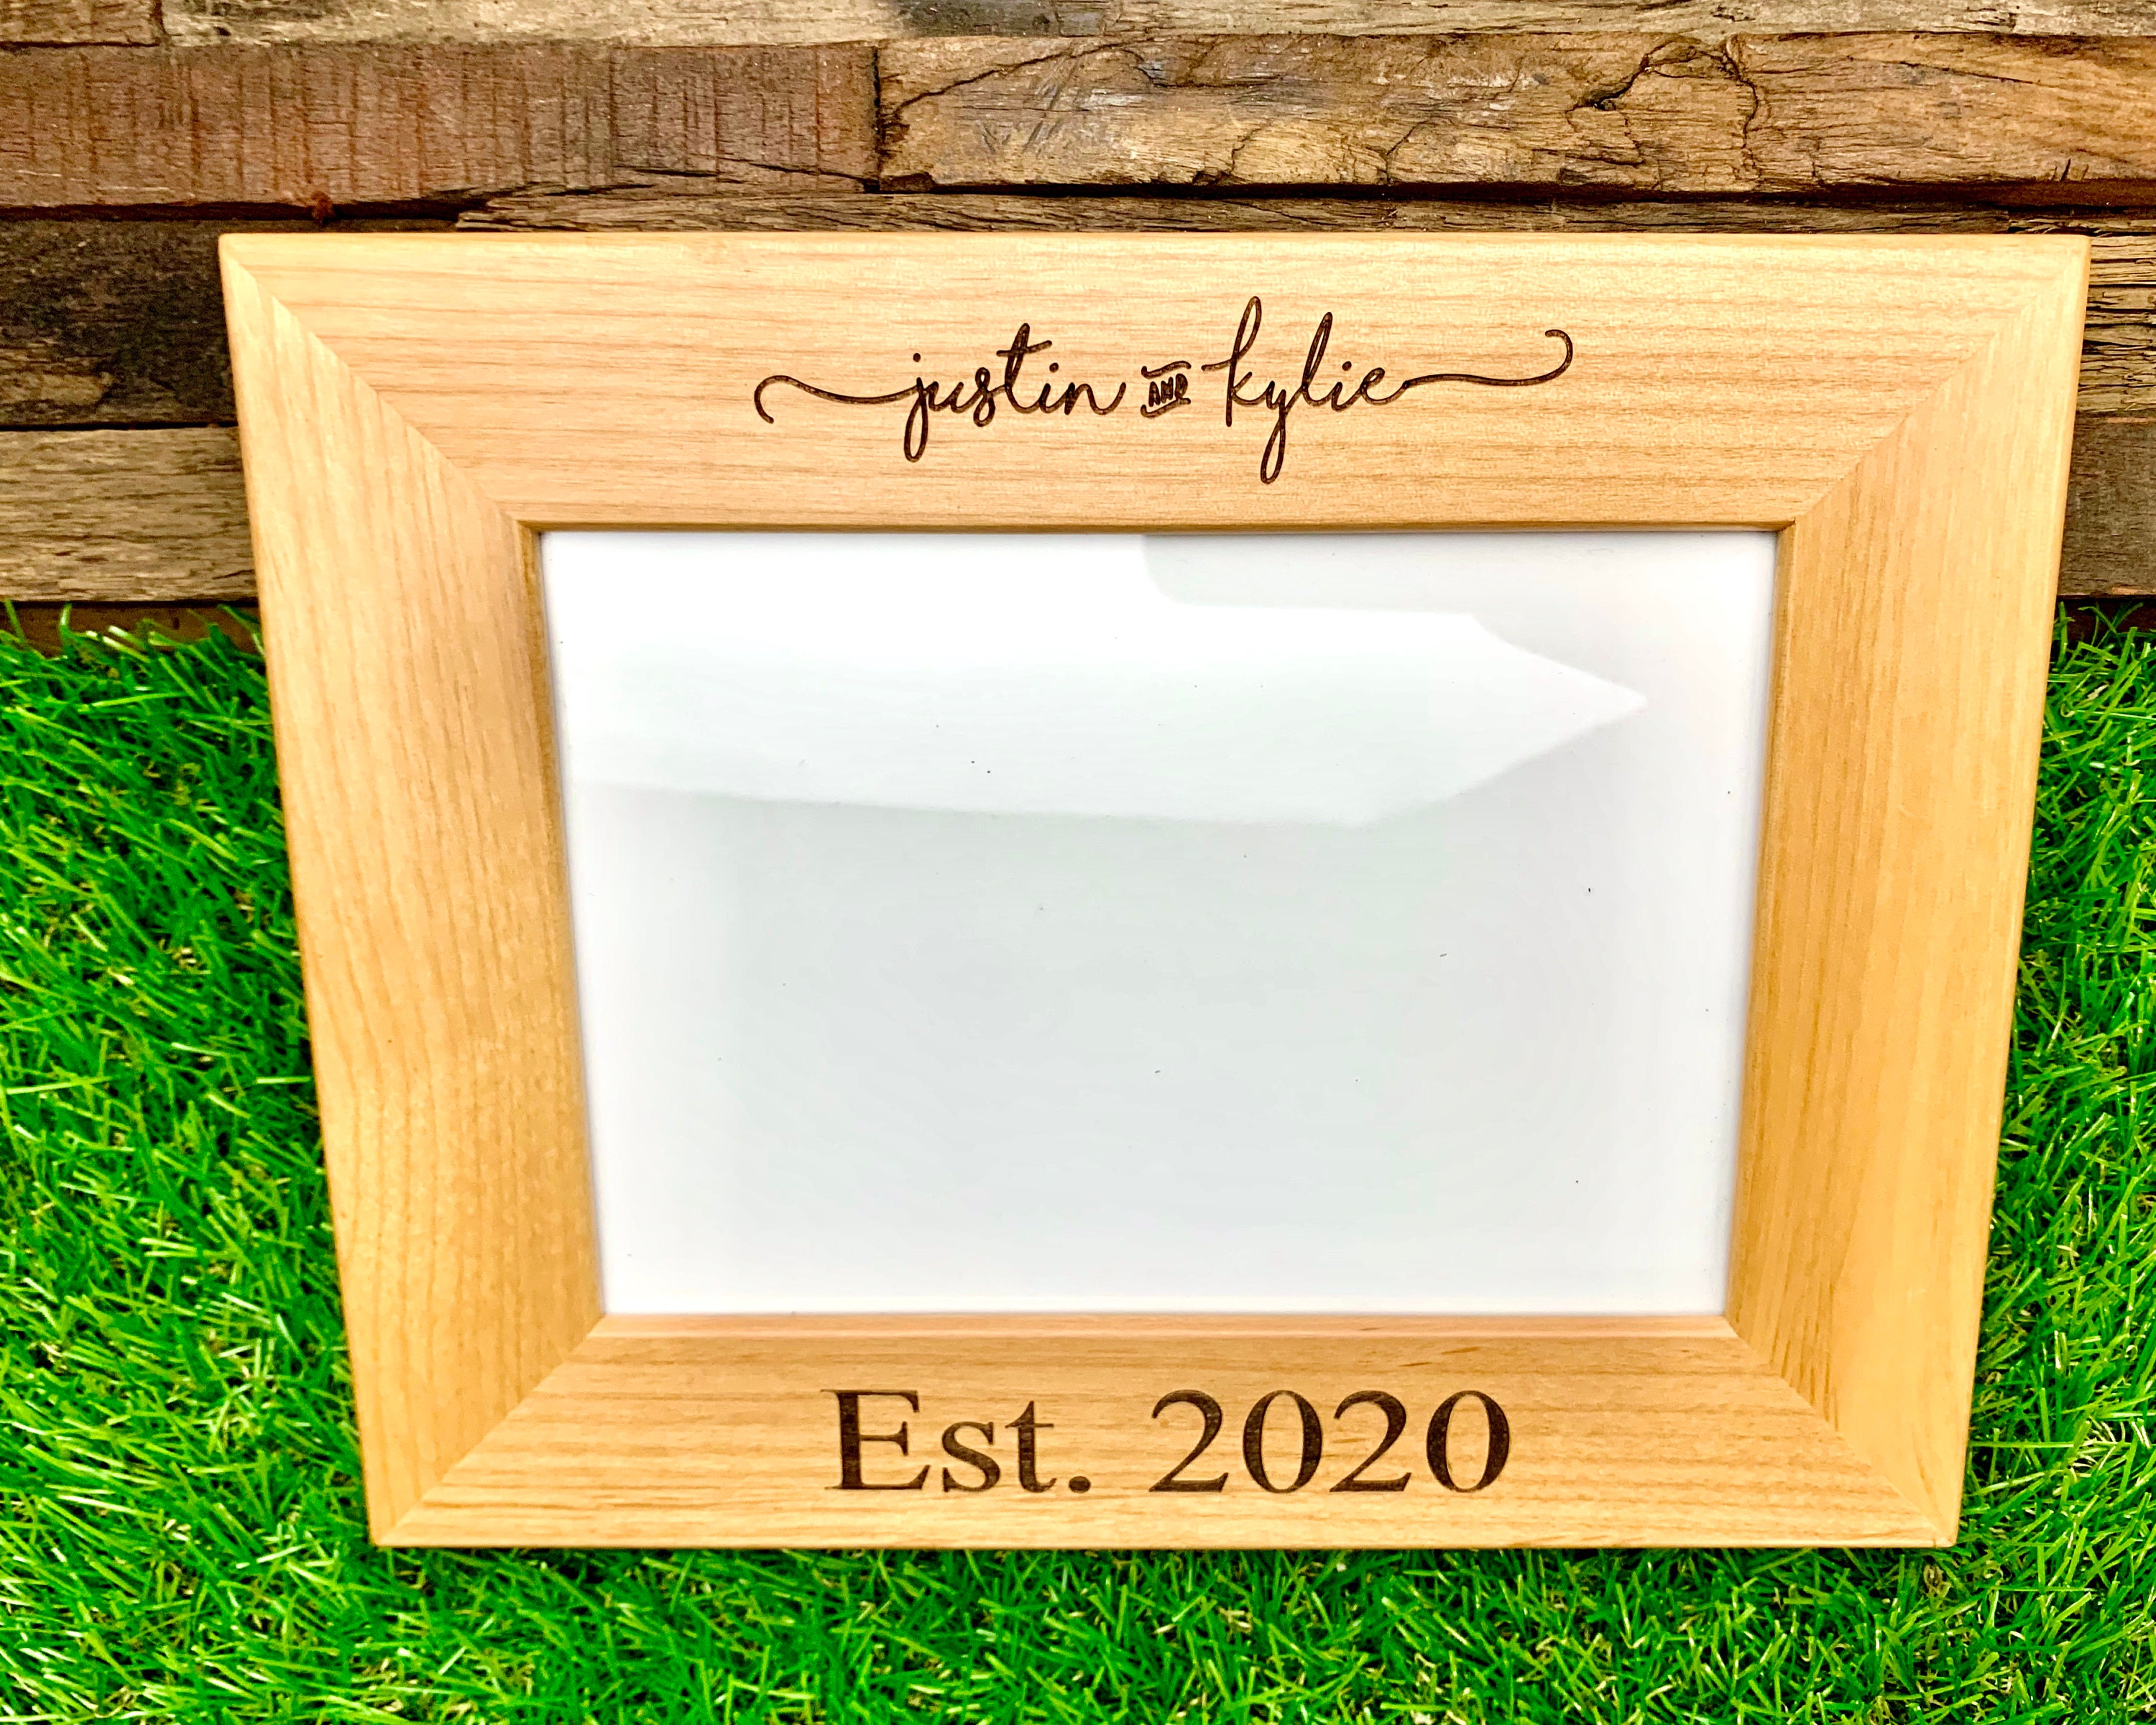 Homokea Autograph Frame Signable Picture Frame Wedding Guest Book 11x14  Wood Frame 5x7 Picture (Frame)